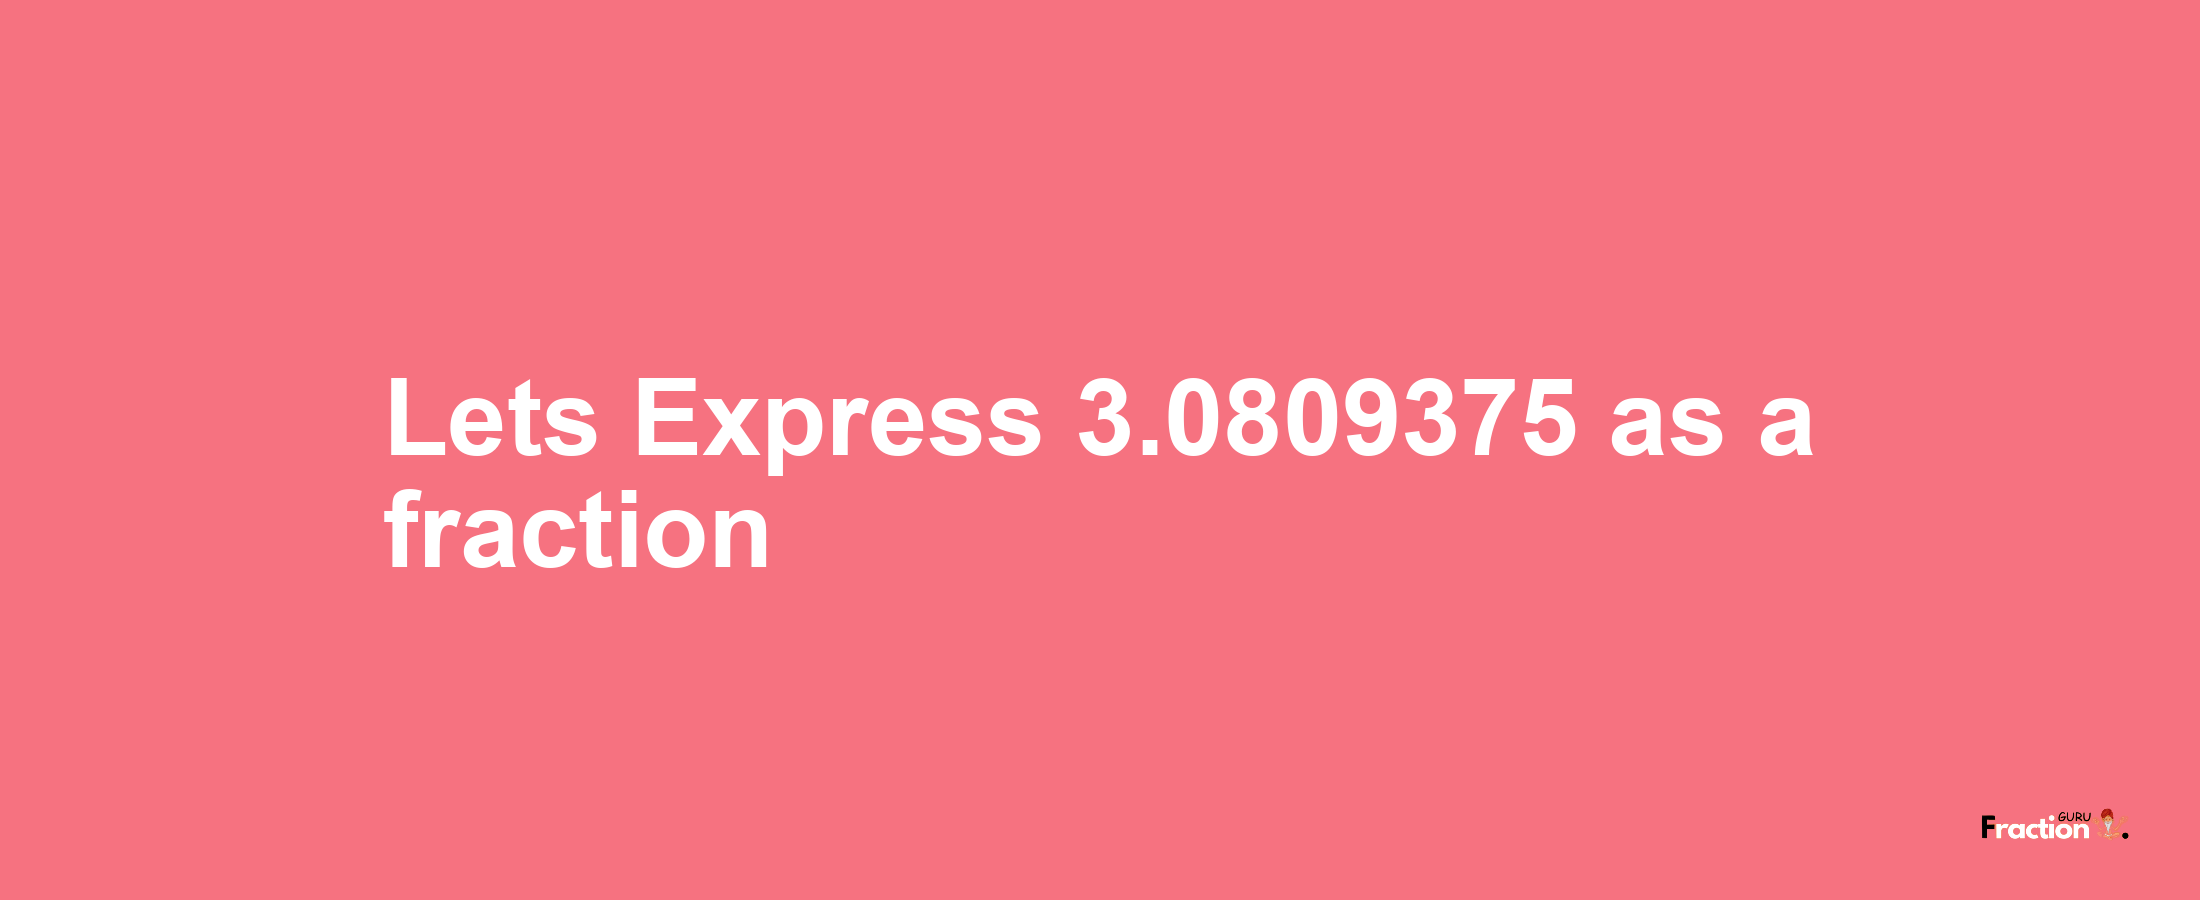 Lets Express 3.0809375 as afraction